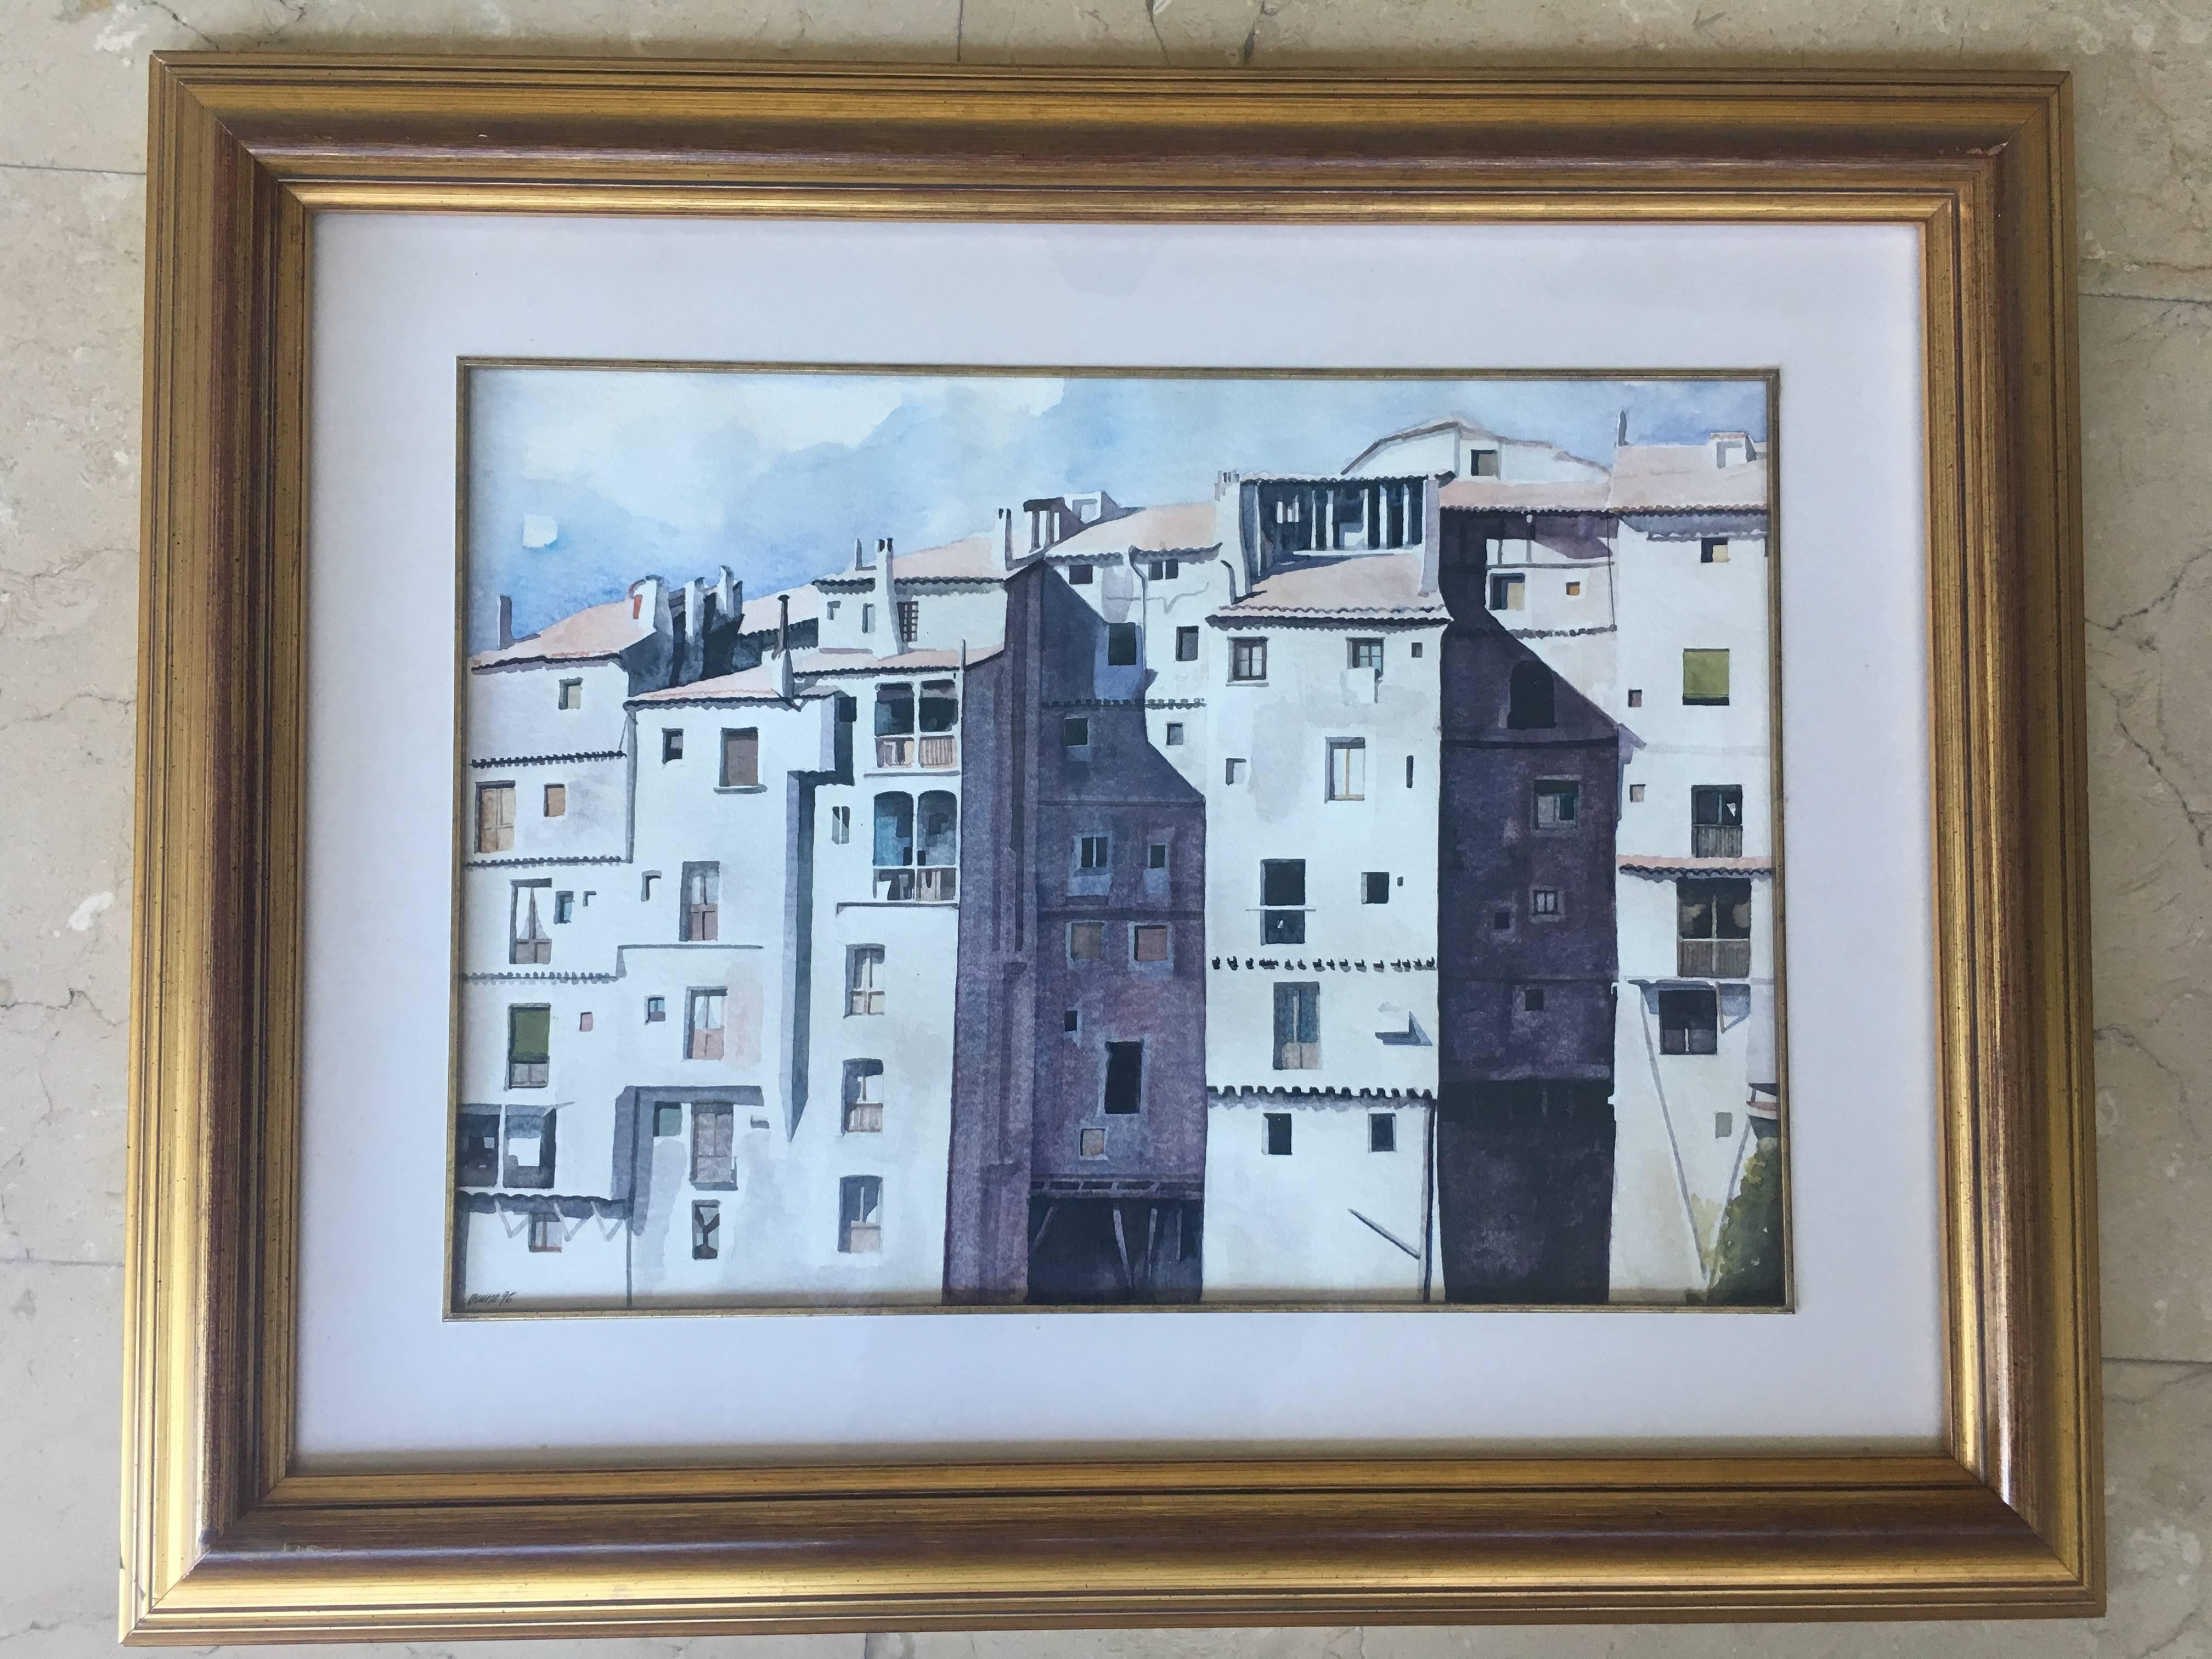 Cuenca- original realist watercolor painting - Painting by Pascual Bueno Ferrer